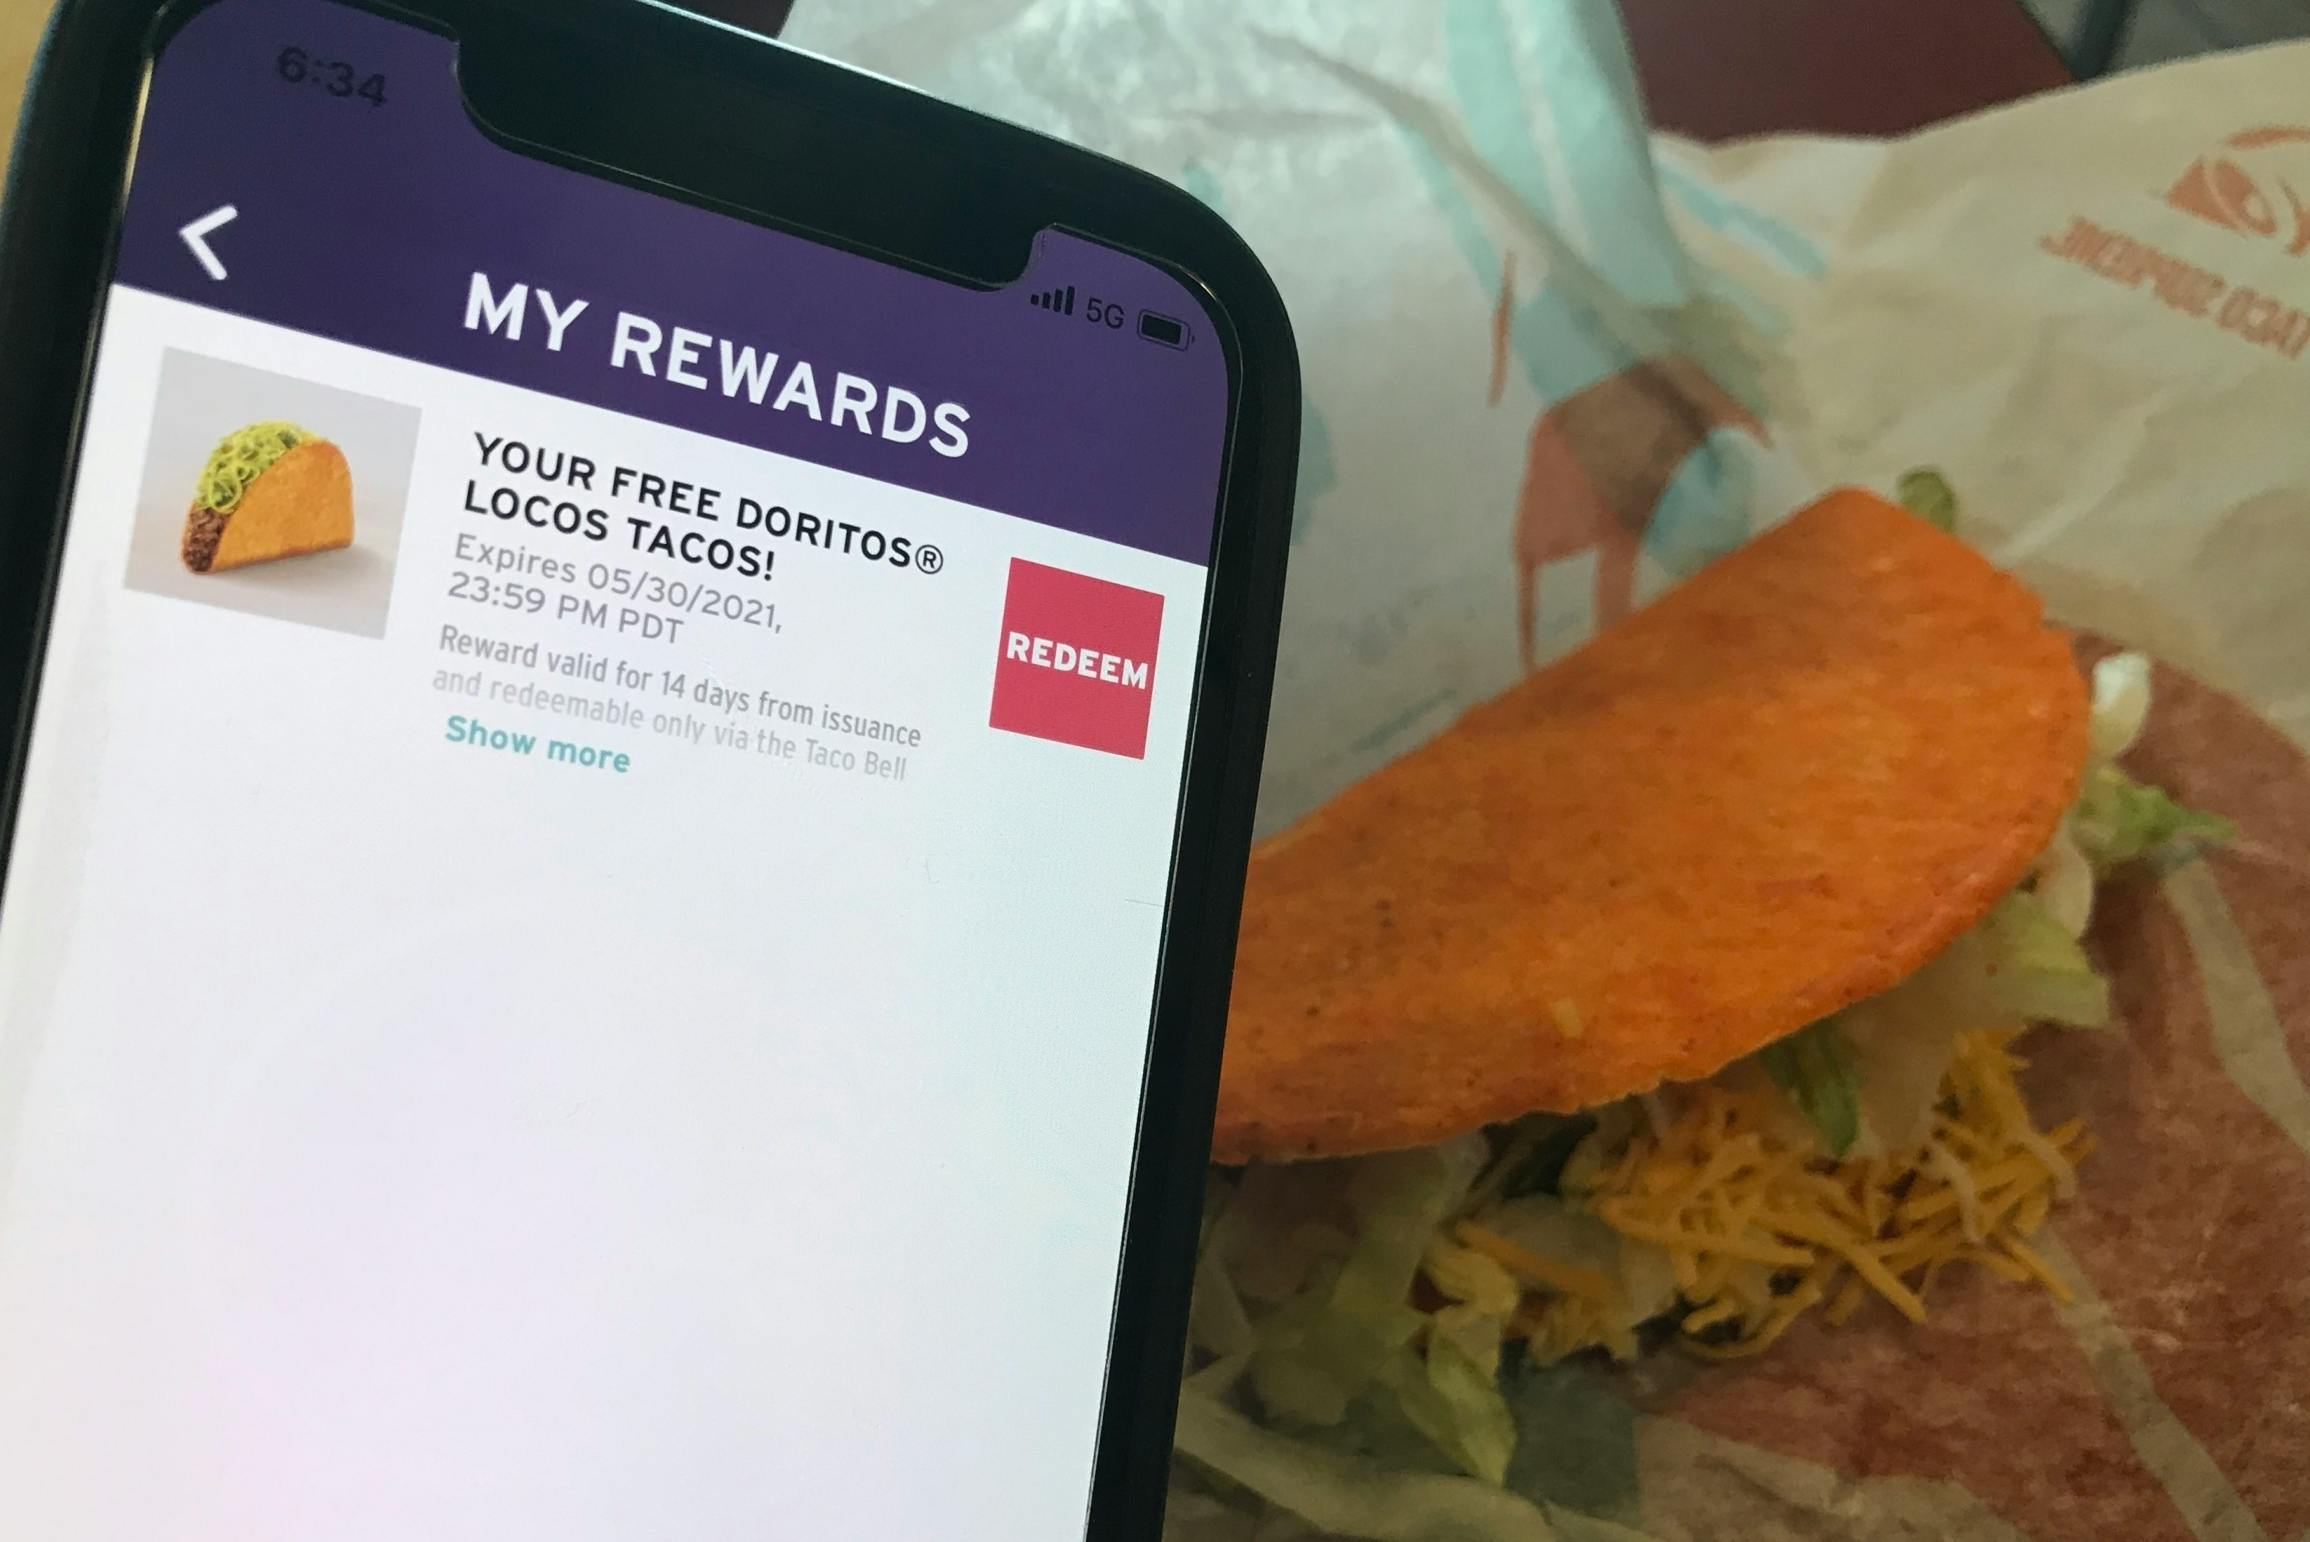 A cell phone displaying the Taco Bell app's My Rewards page, with a reward for a free Doritos Locos Tacos, being held in front of a Doritos Locos Tacos sitting on its paper wrapper.